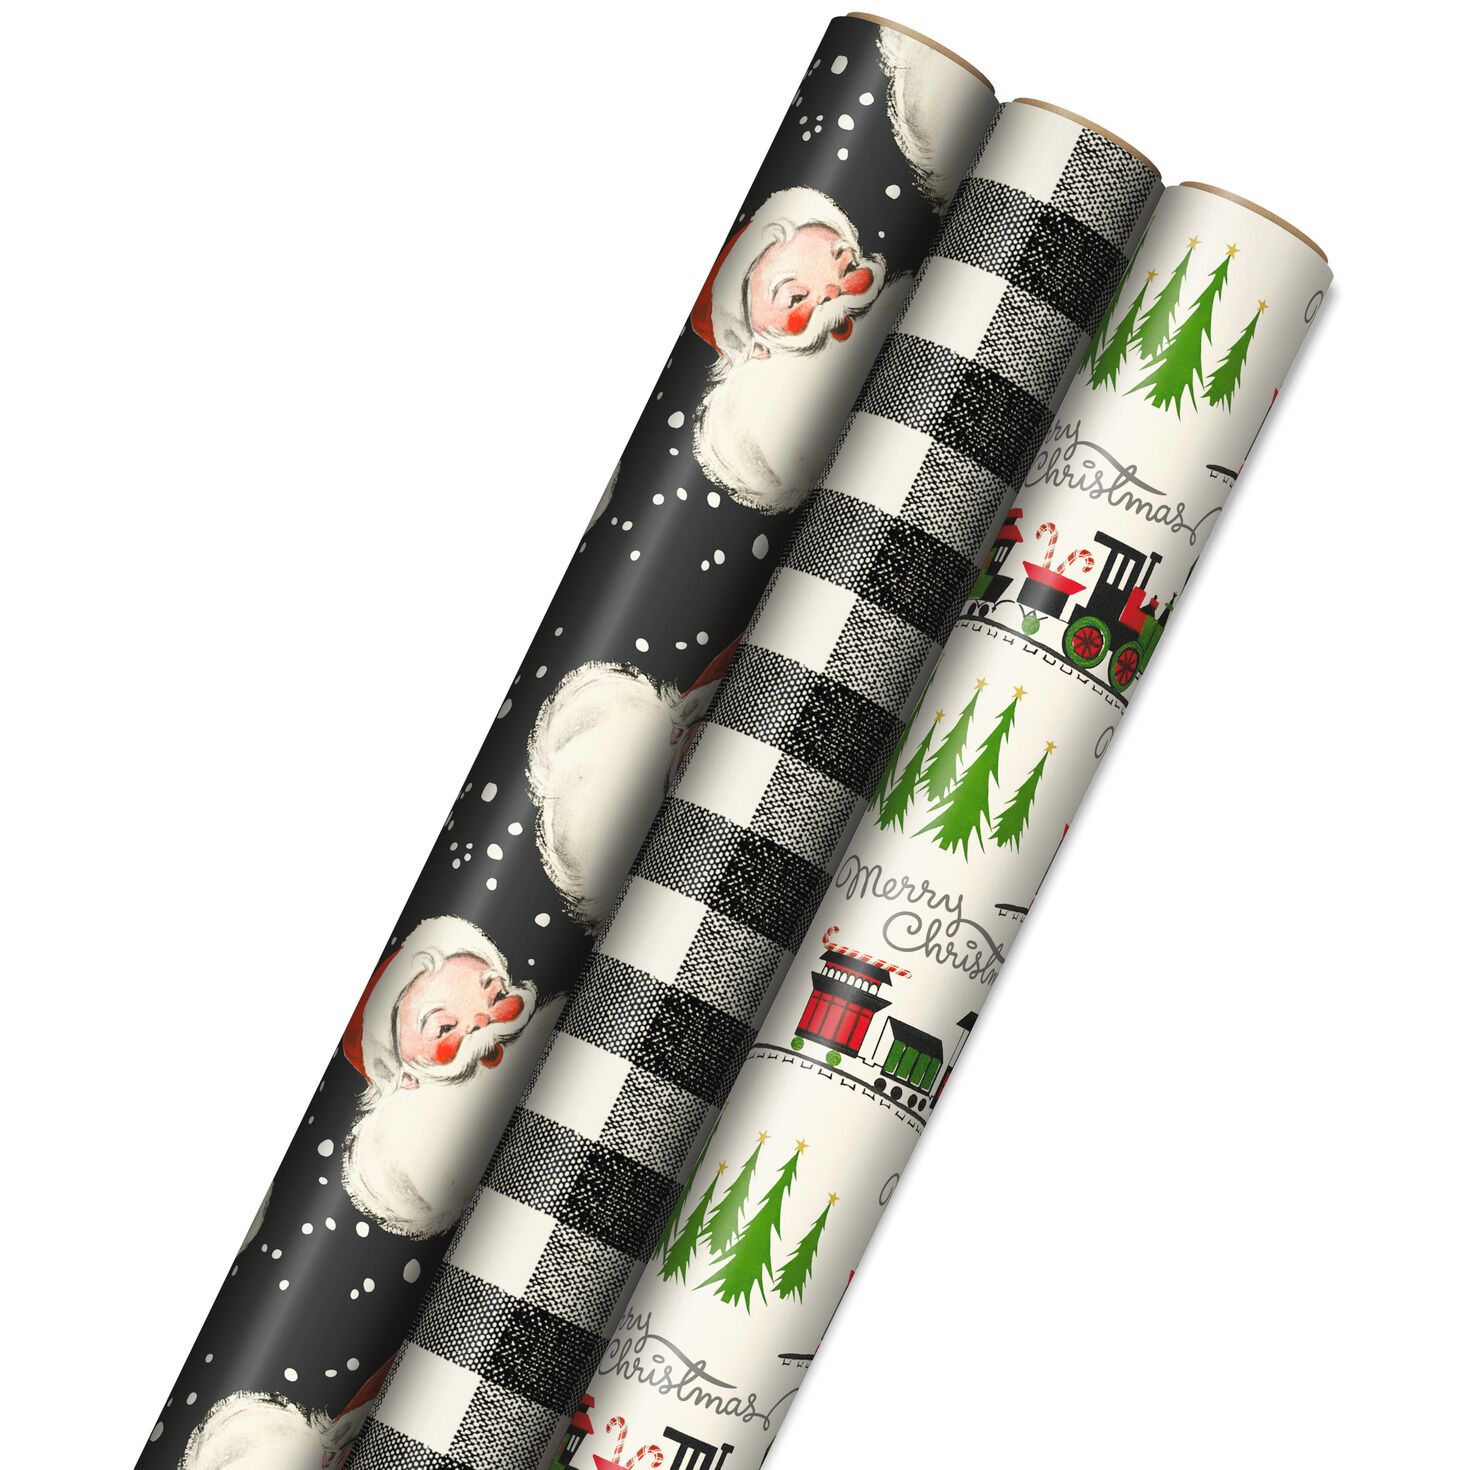 Vintage Christmas Paper  Vintage christmas wrapping paper